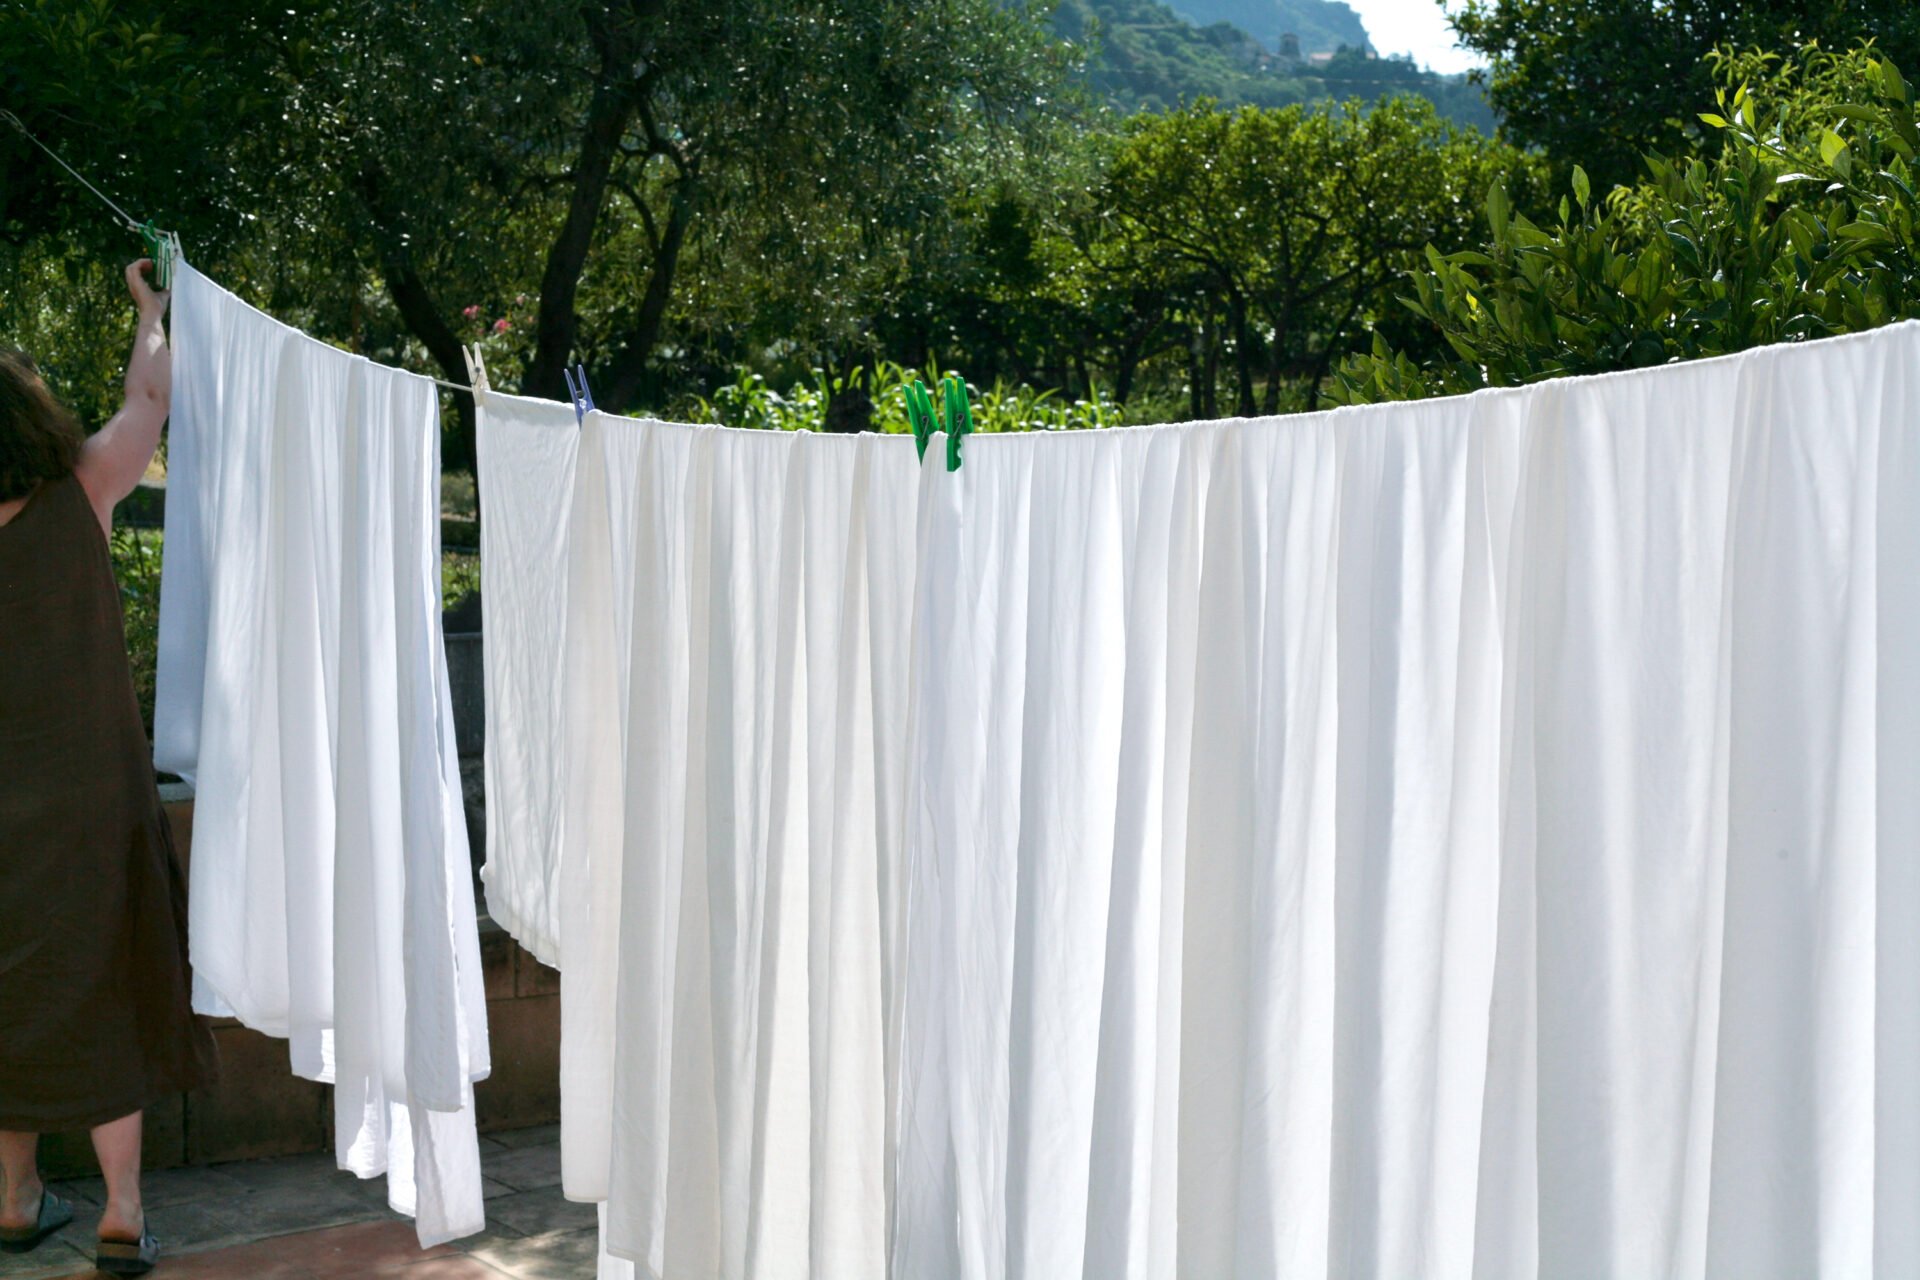 Organic cotton sheets being dried in the sun